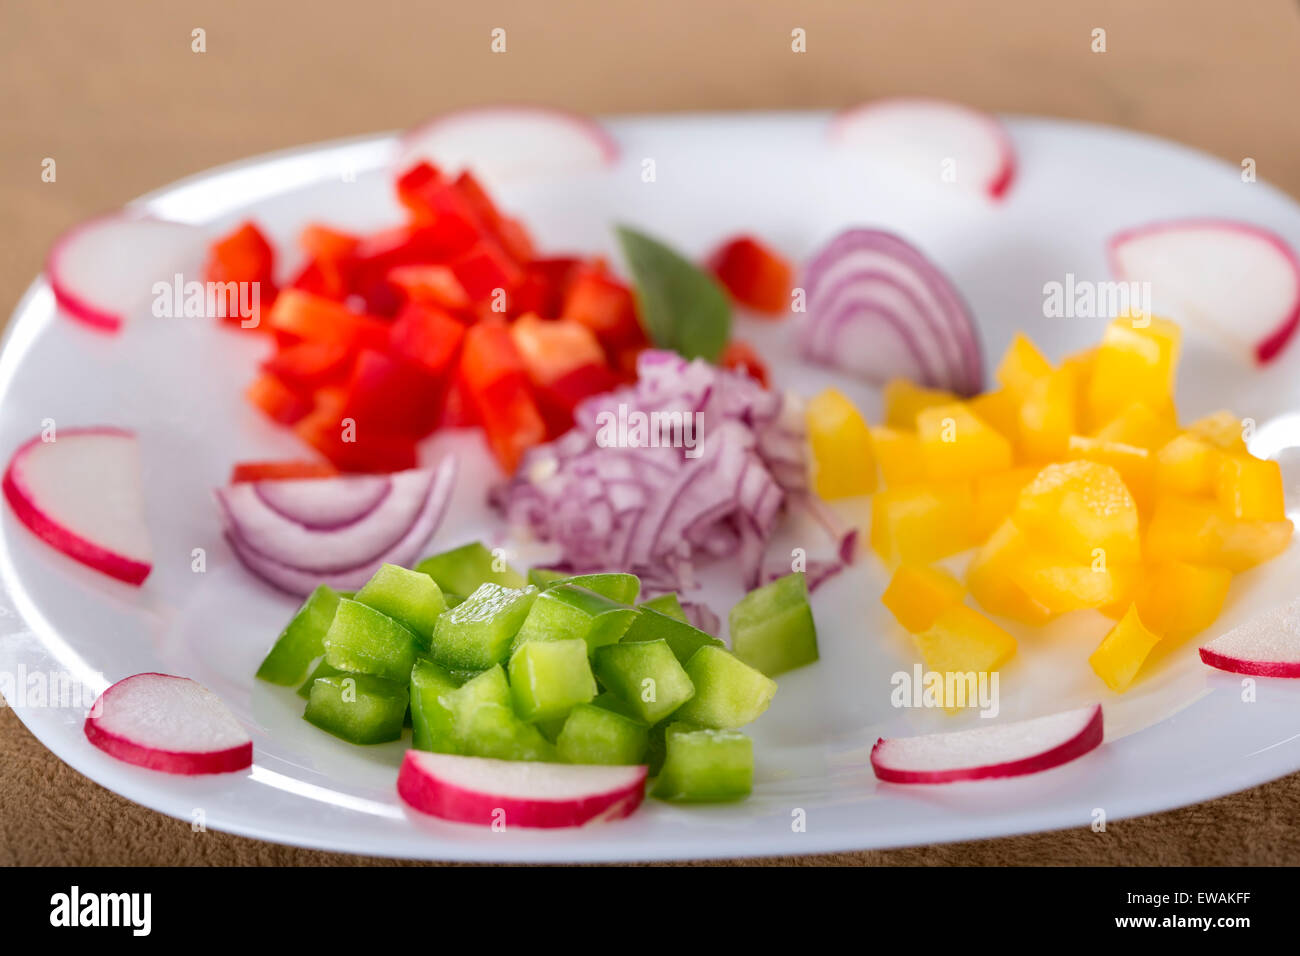 Fresh chopped vegetables on white plate for salad Stock Photo